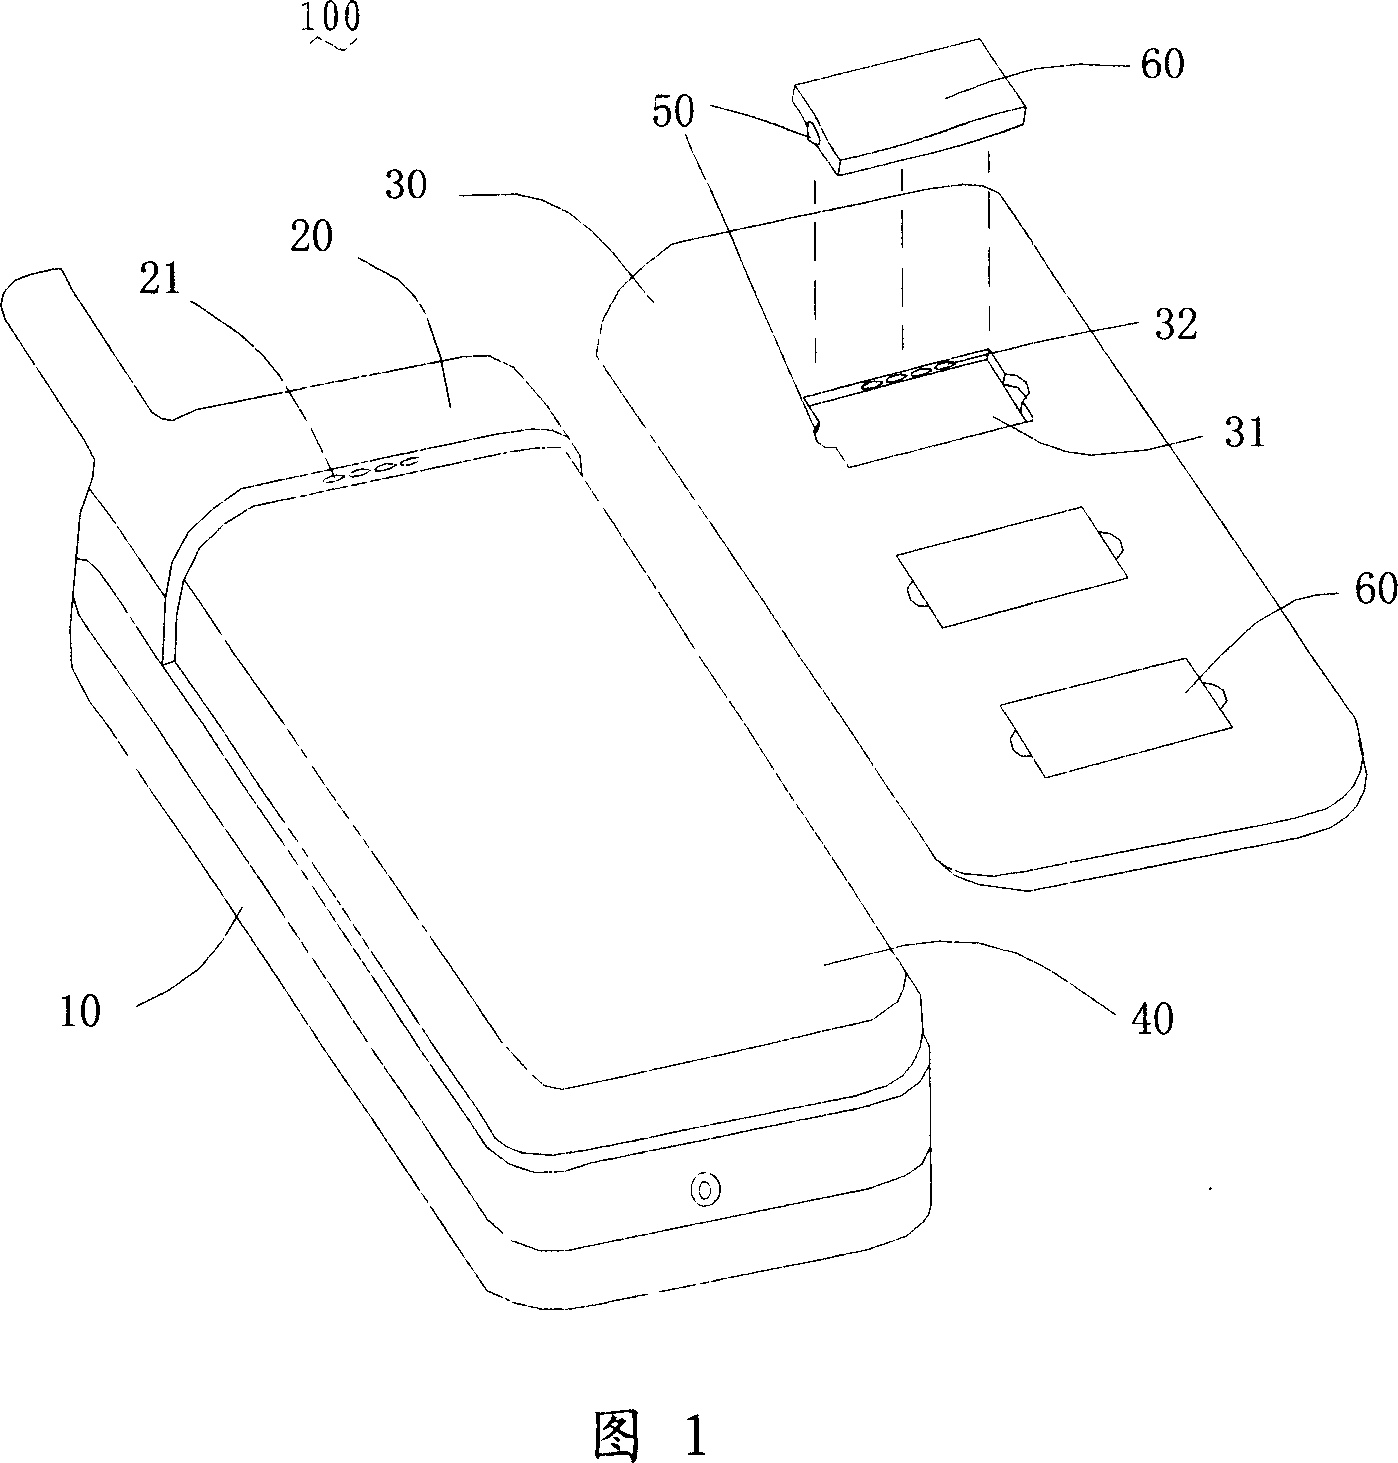 Mobile communication terminal of plug able function module, and method